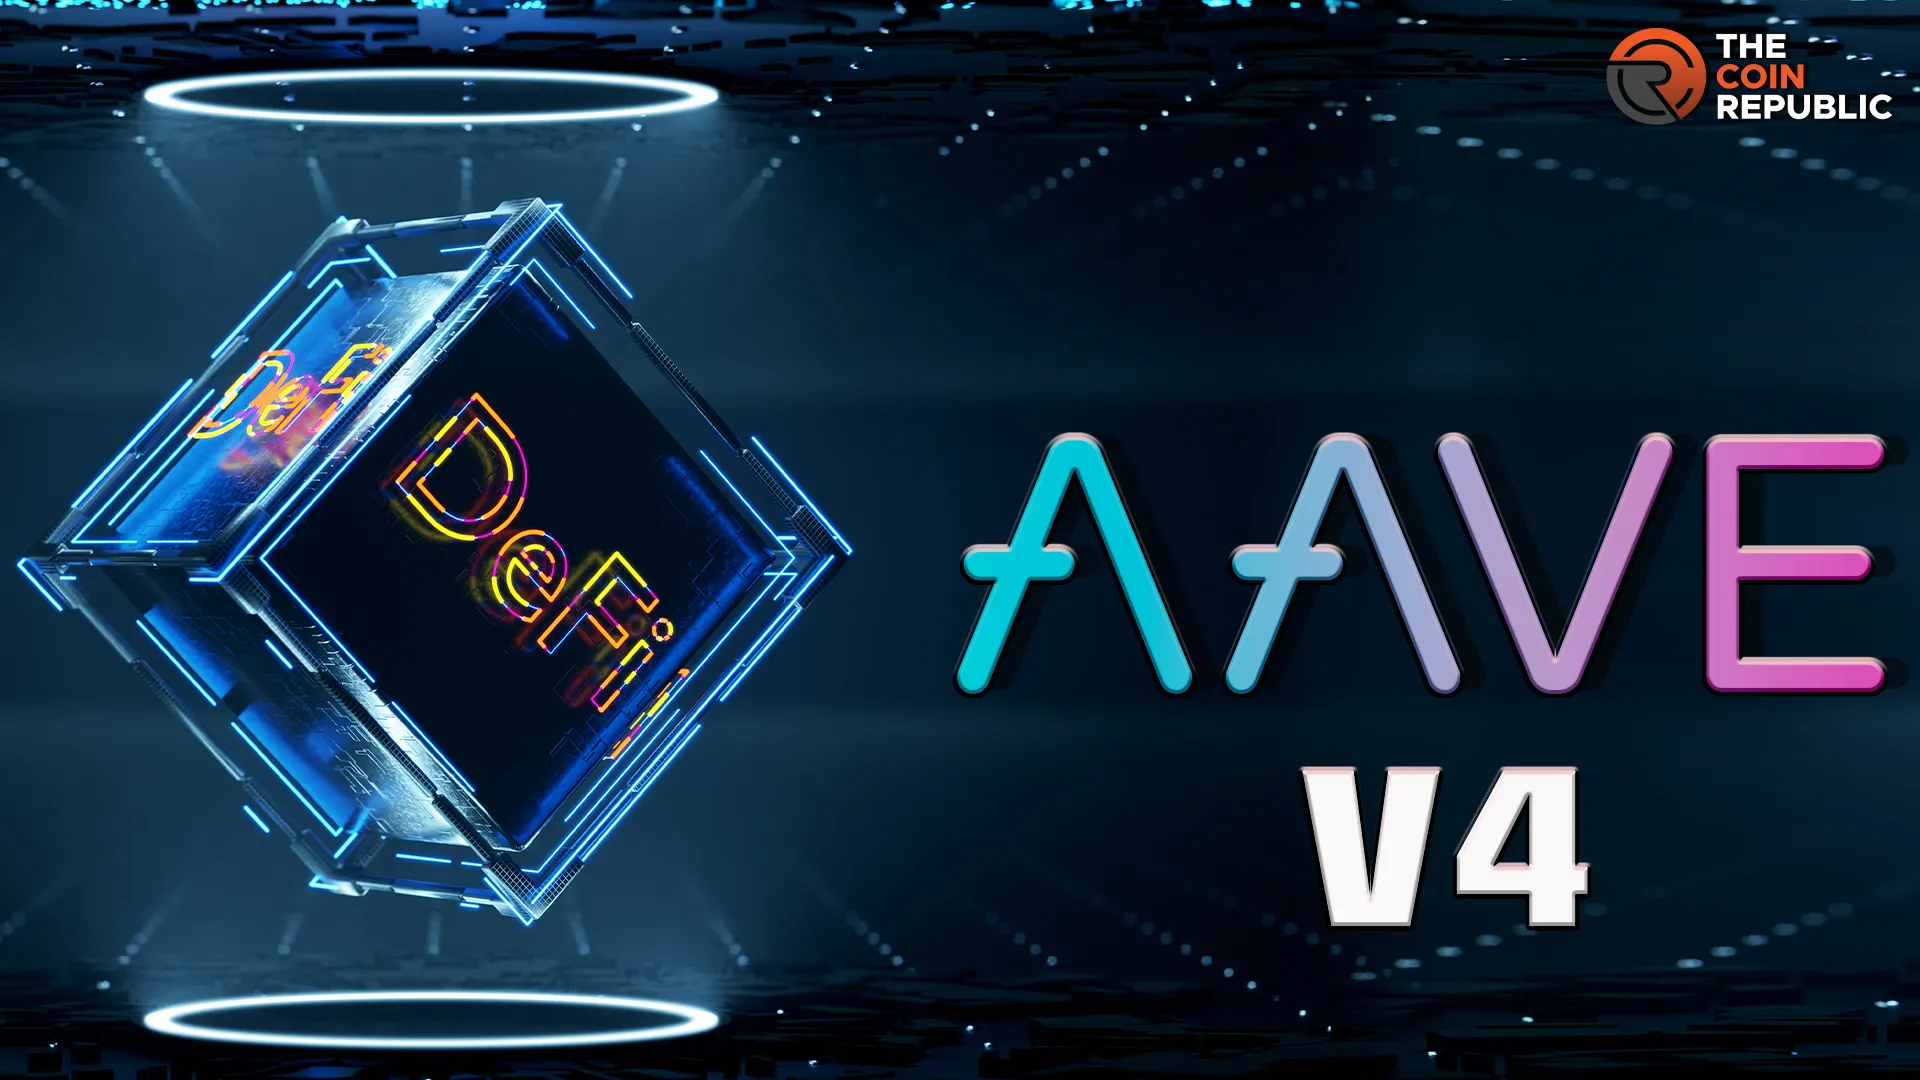 What Will Be Updated In Aave V4 Protocol? DeFi Giant Revealed